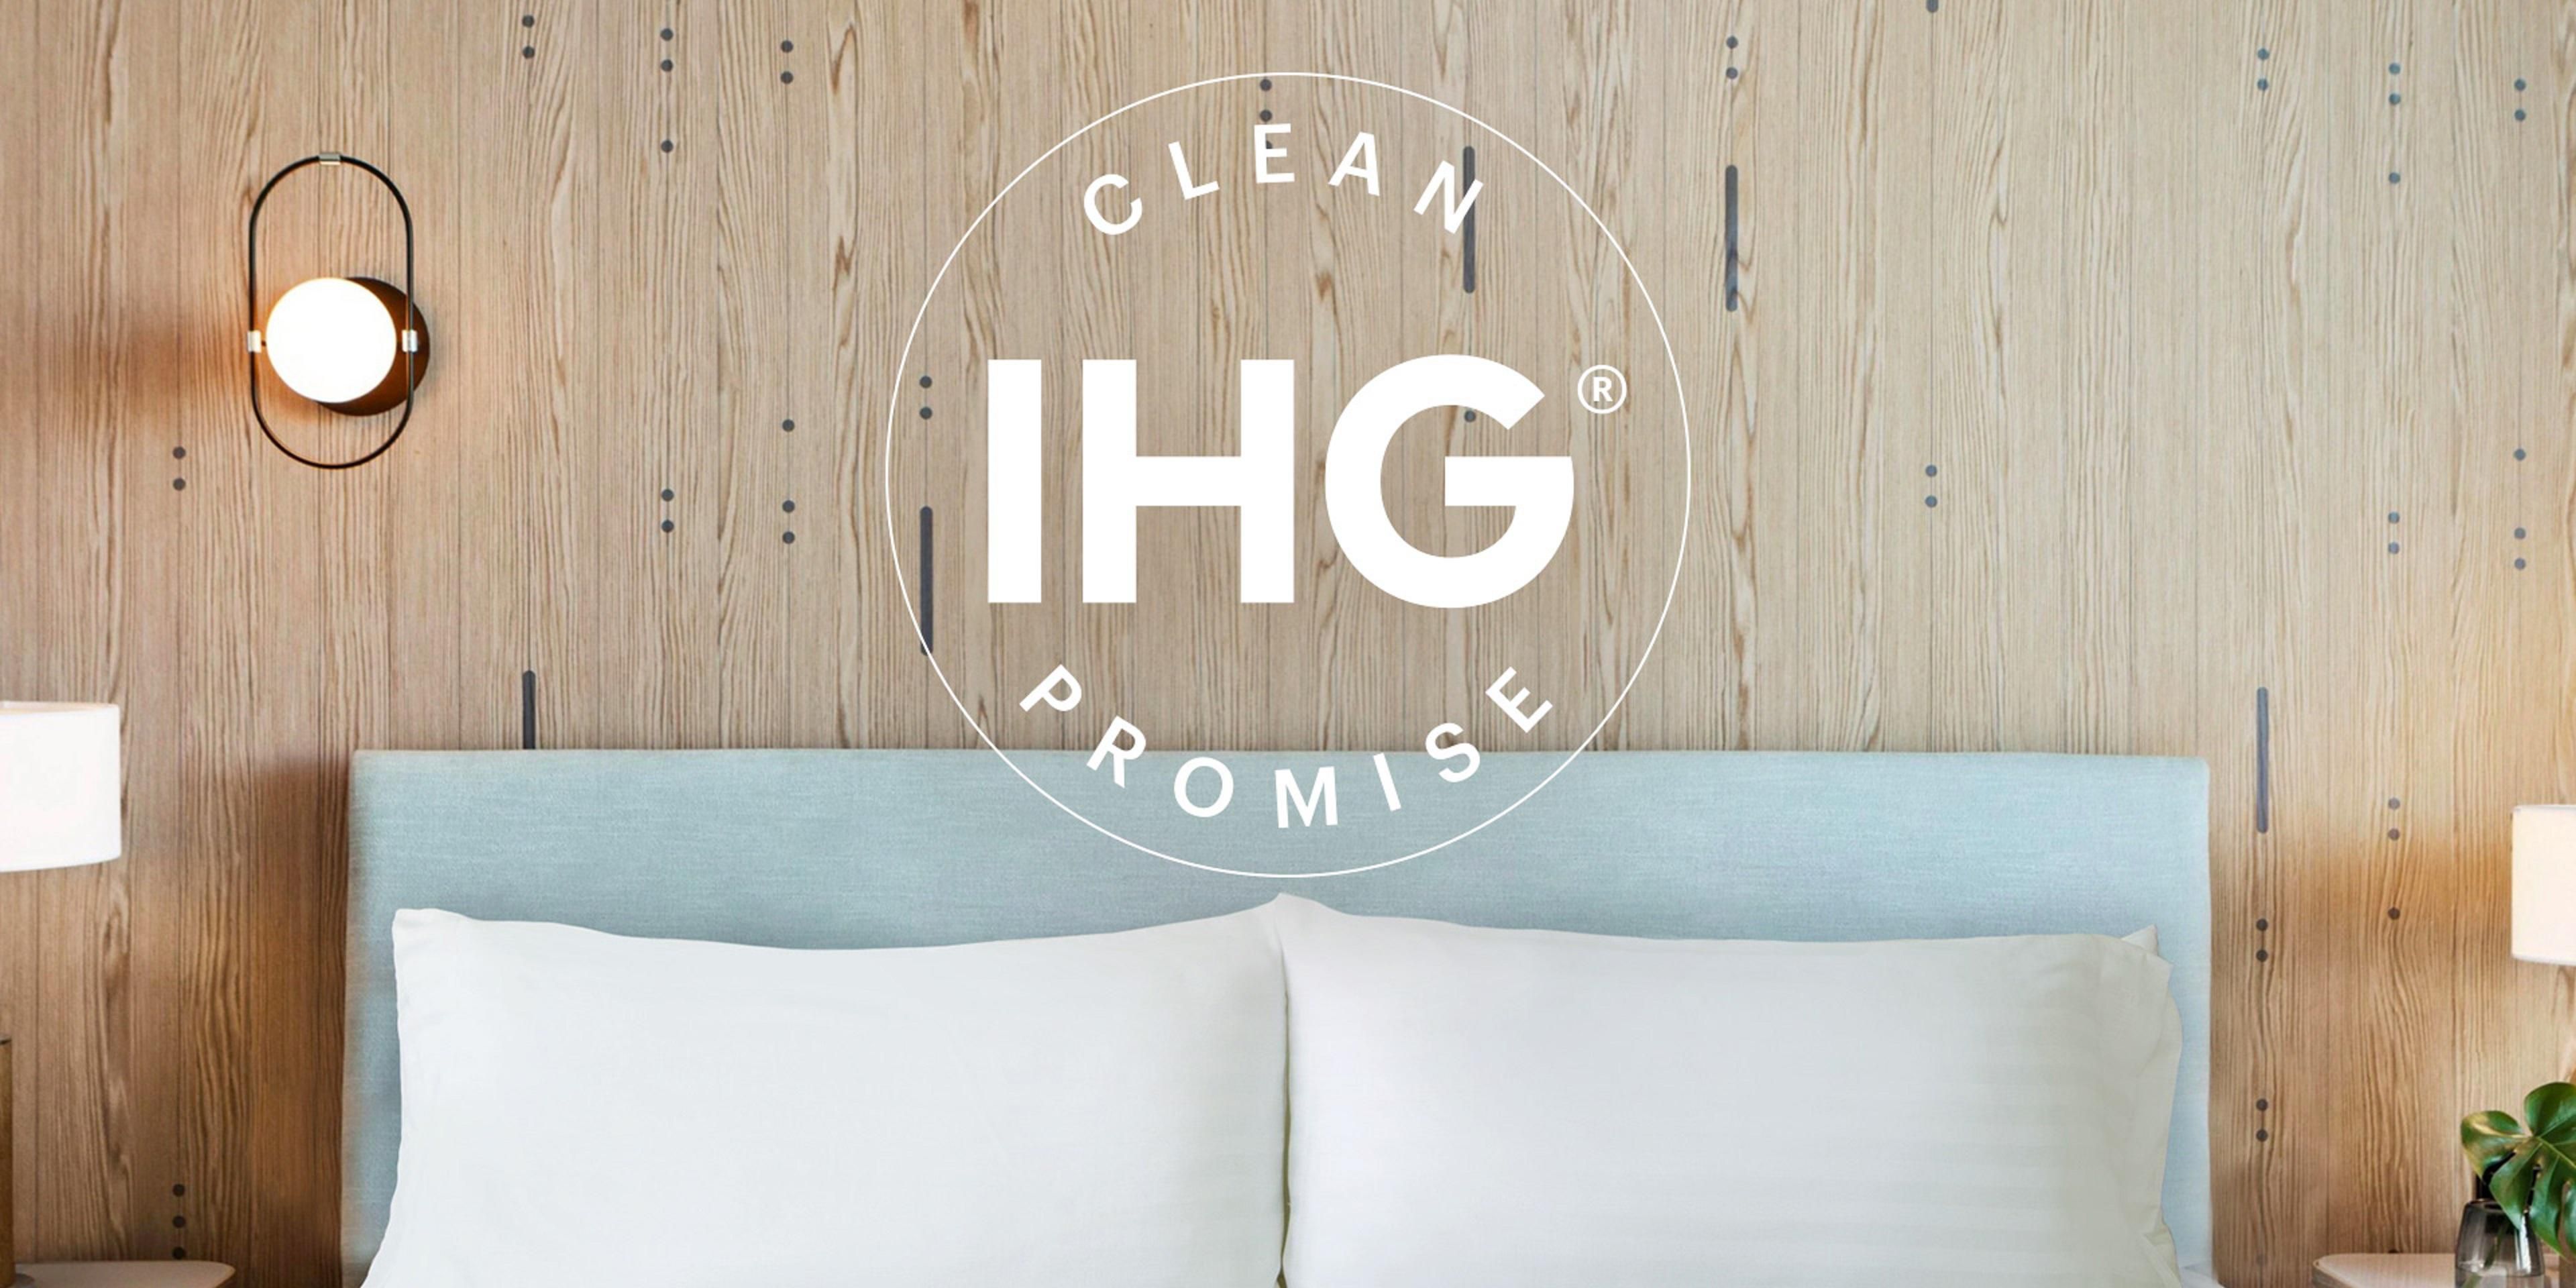 IHG has a long-standing commitment to rigorous cleaning procedures. This IHG Way of Clean program is now being expanded with additional COVID-19 protocols and best practices.